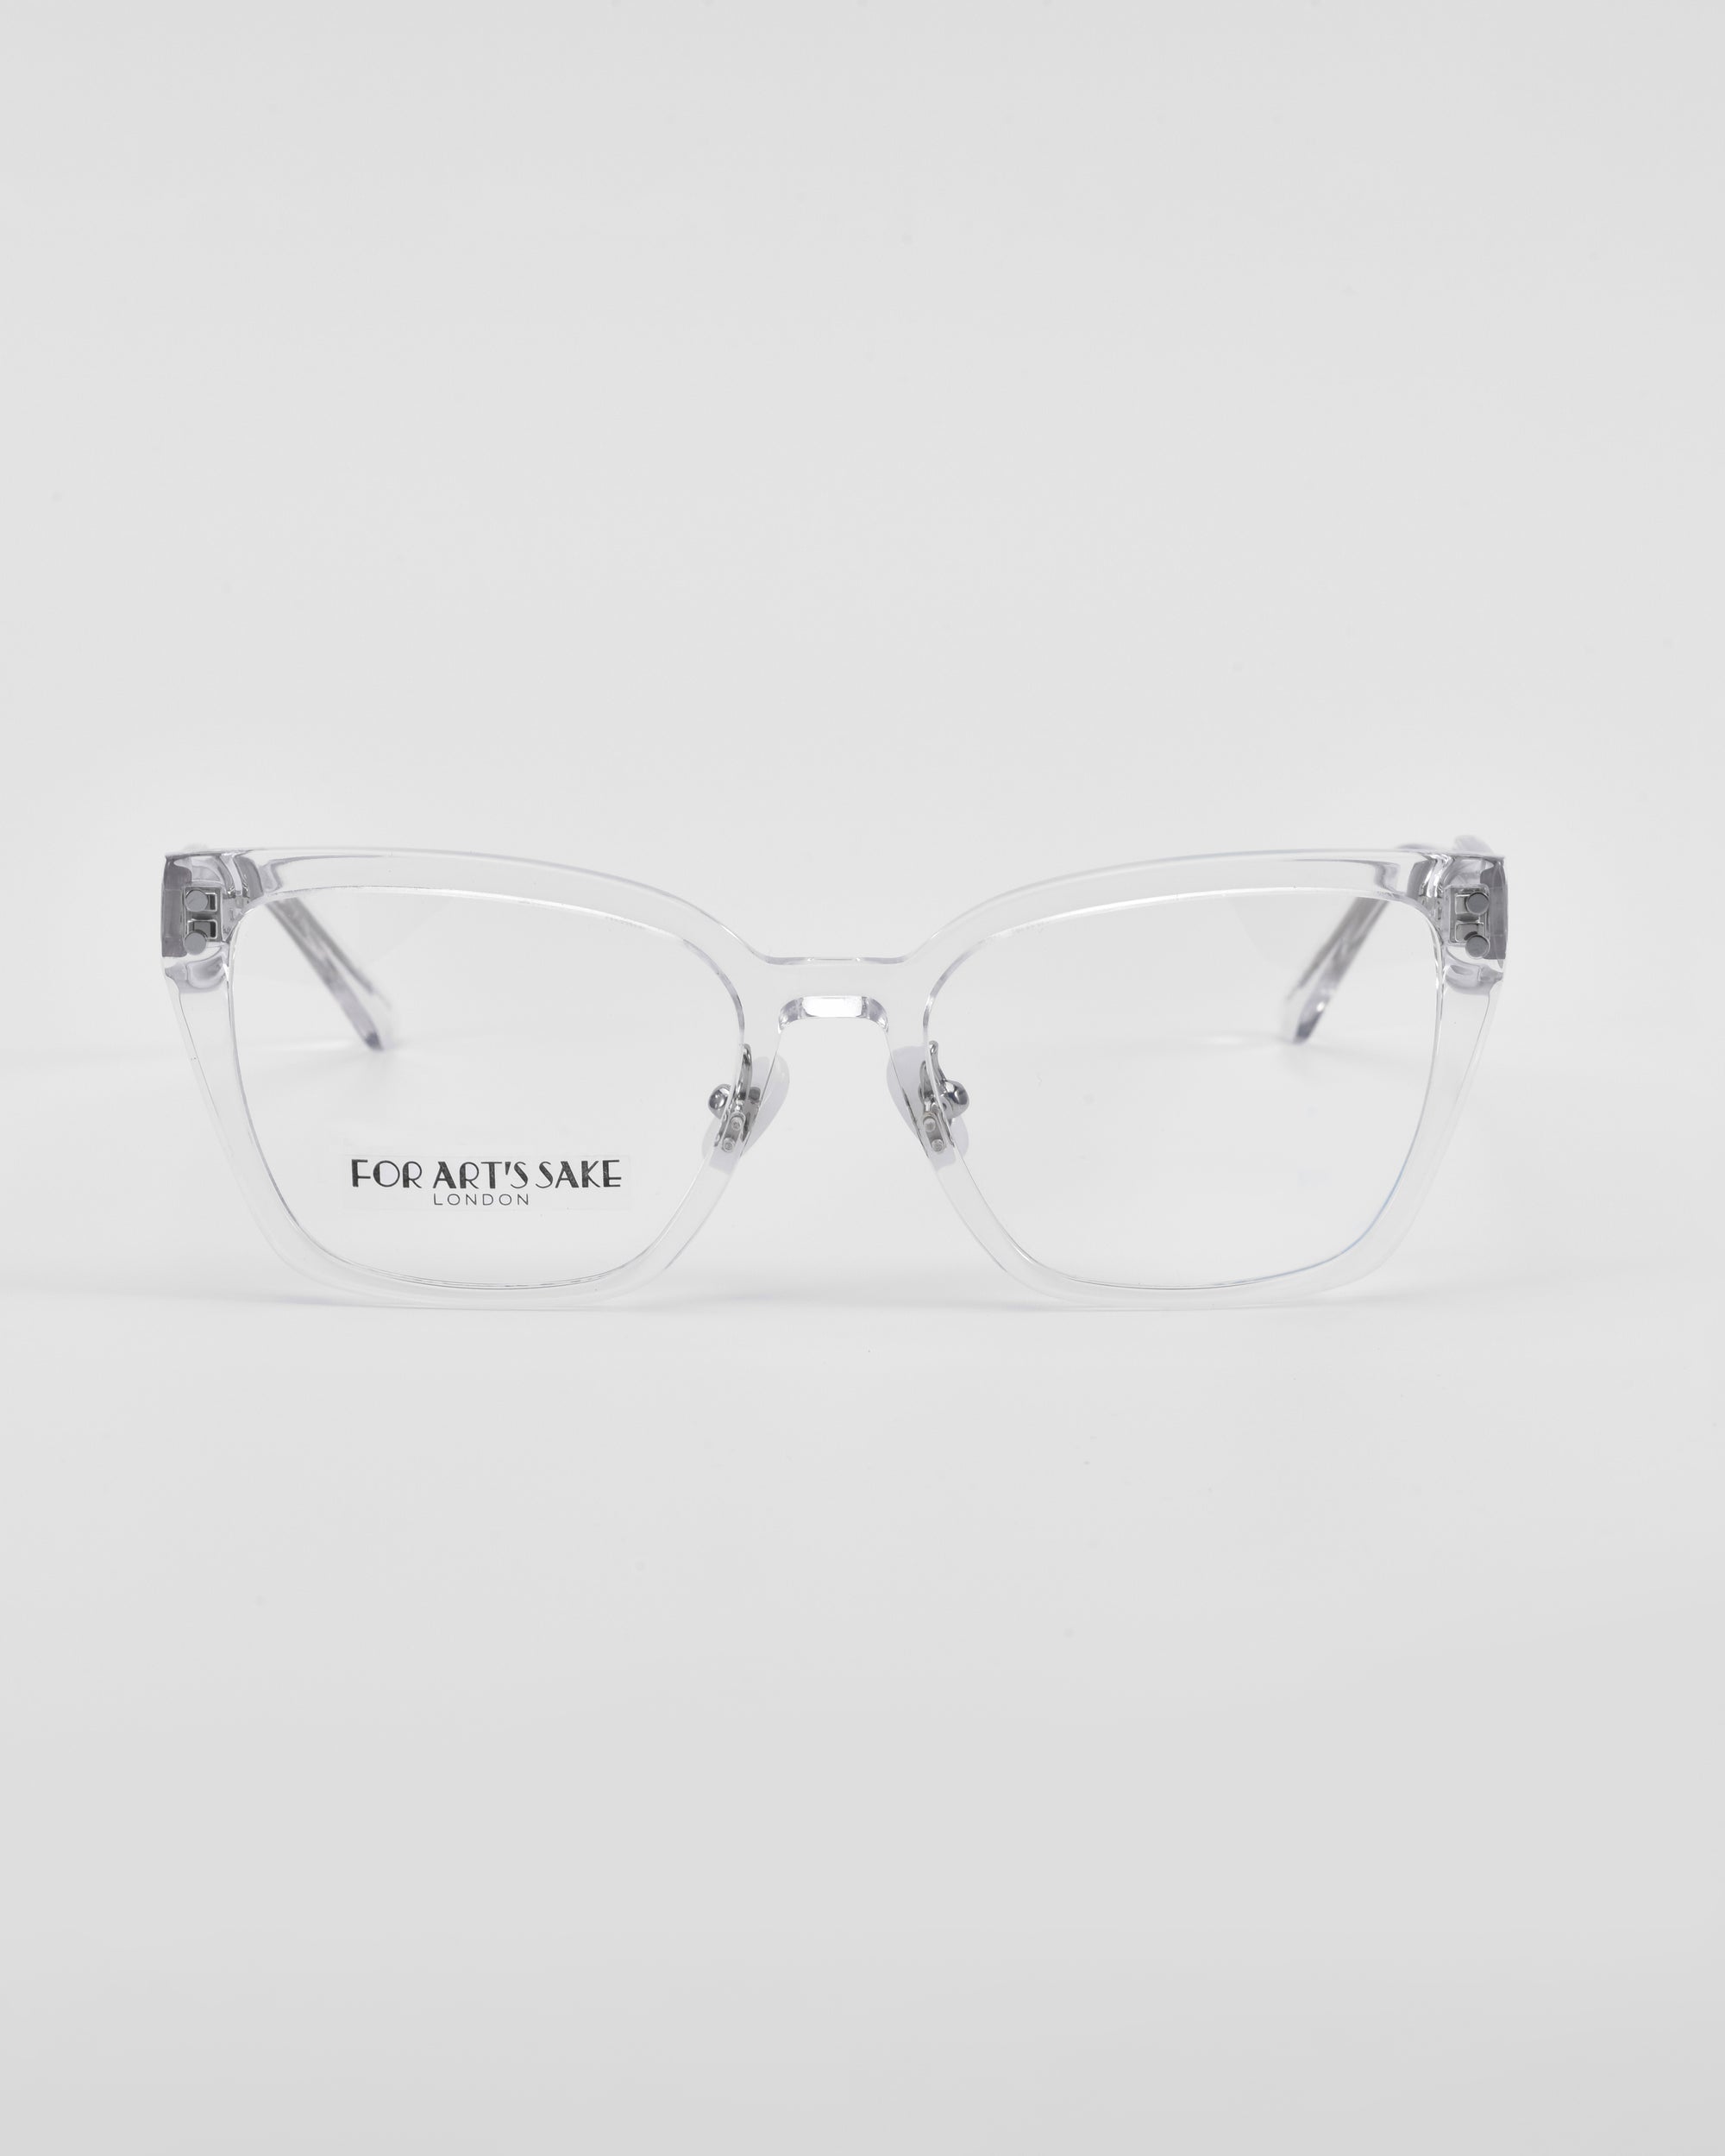 A pair of transparent prescription glasses with a minimalist design, rectangular lenses, and &quot;For Art&#39;s Sake®&quot; printed on the left lens. Featuring 18-karat gold-plated accents for an exquisite touch. The background is plain white.